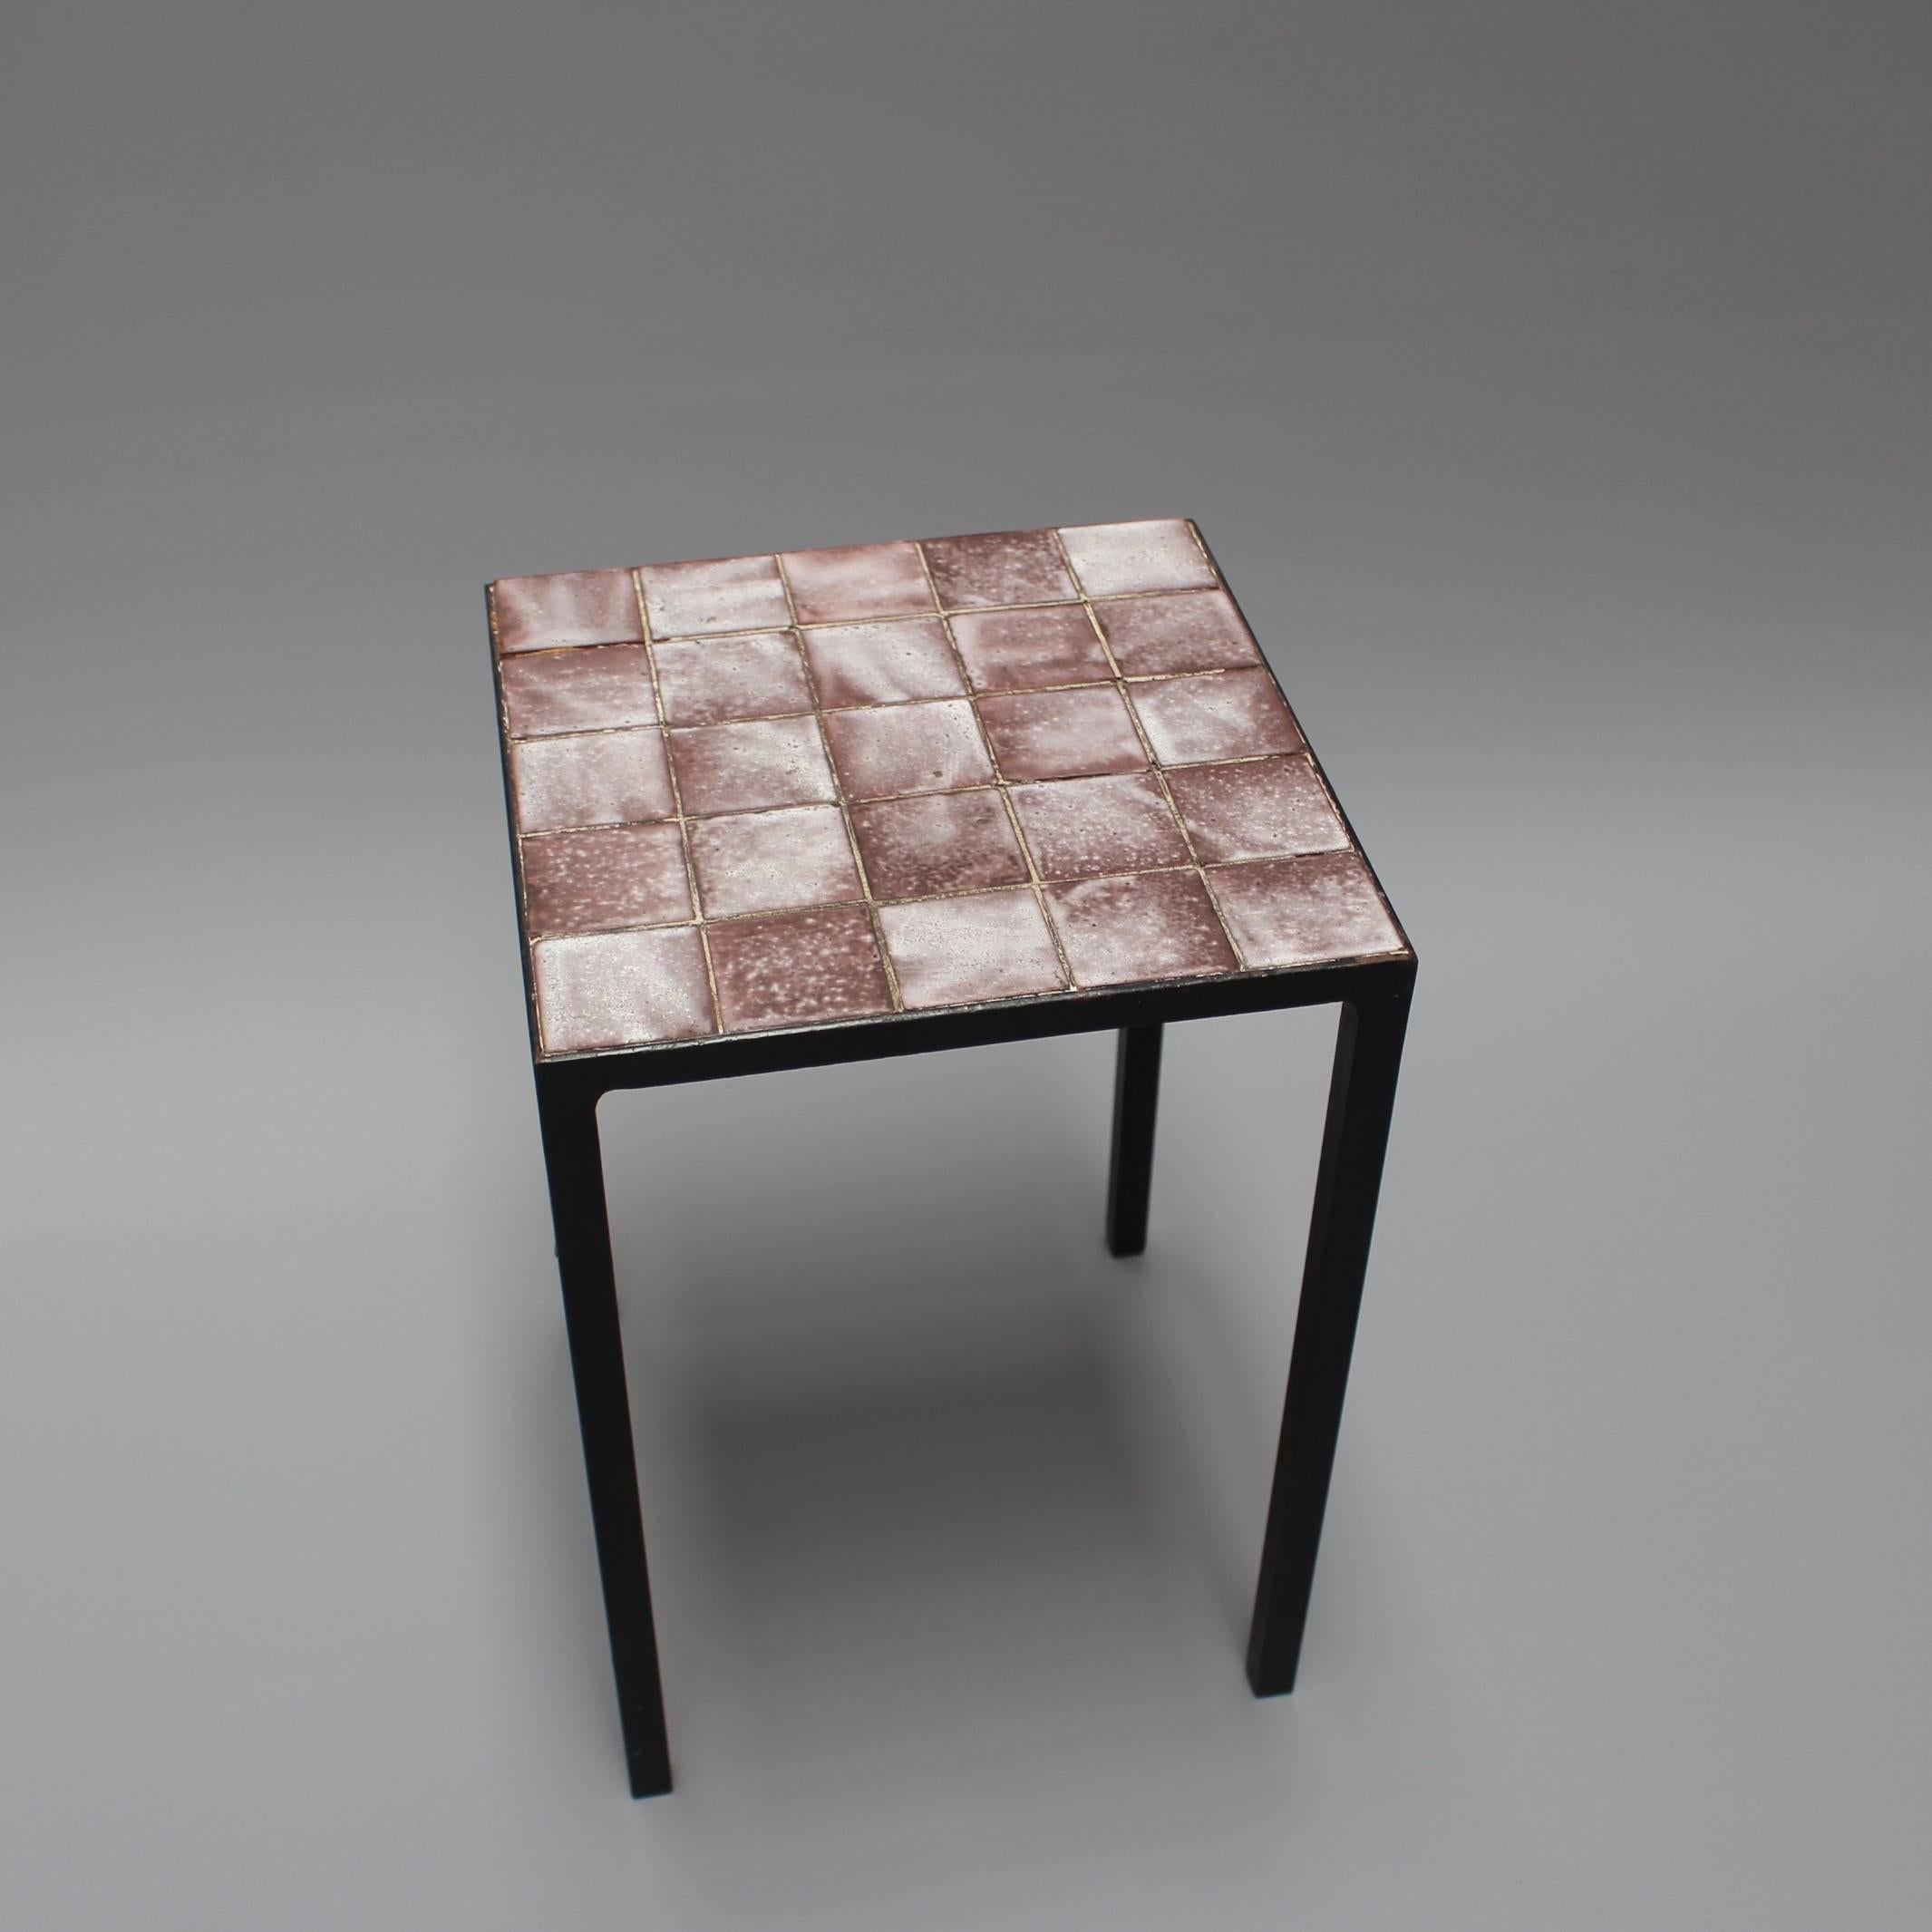 Mid-20th Century Set of Two Purple Ceramic Tiled Side Tables by Mado Jolain, circa 1950s -1960s